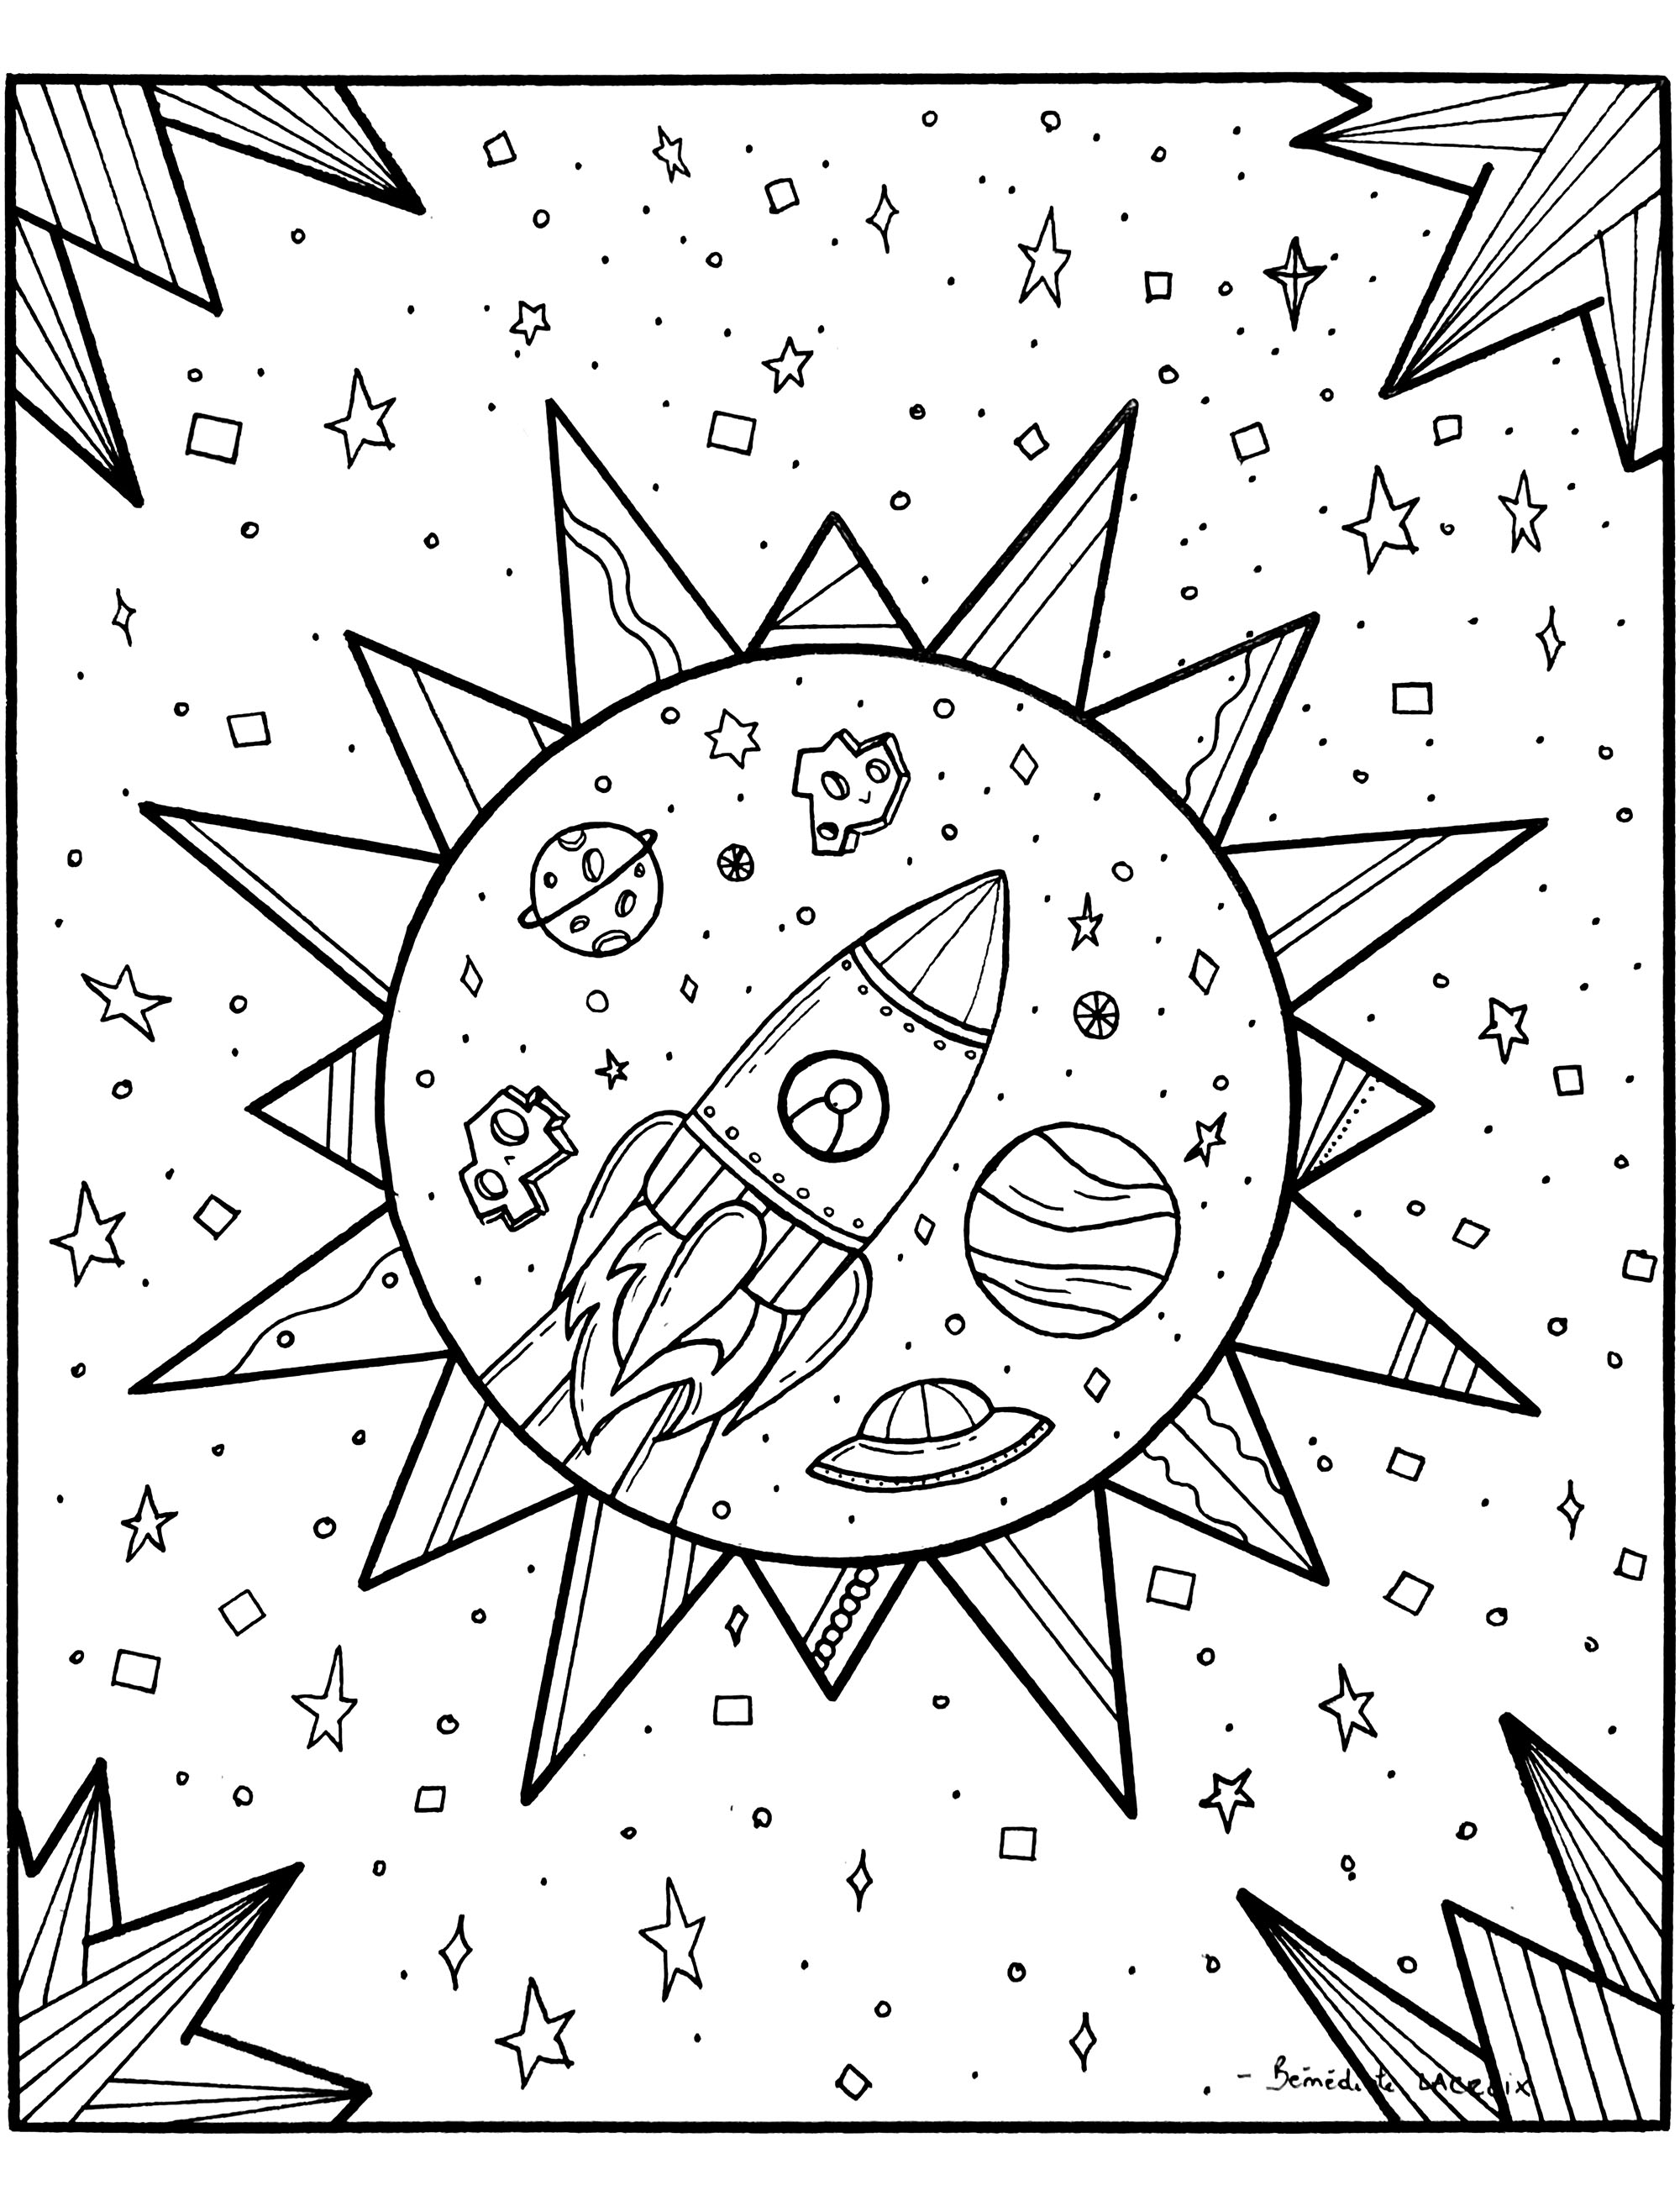 Rocket In Space - Anti Stress Adult Coloring Pages